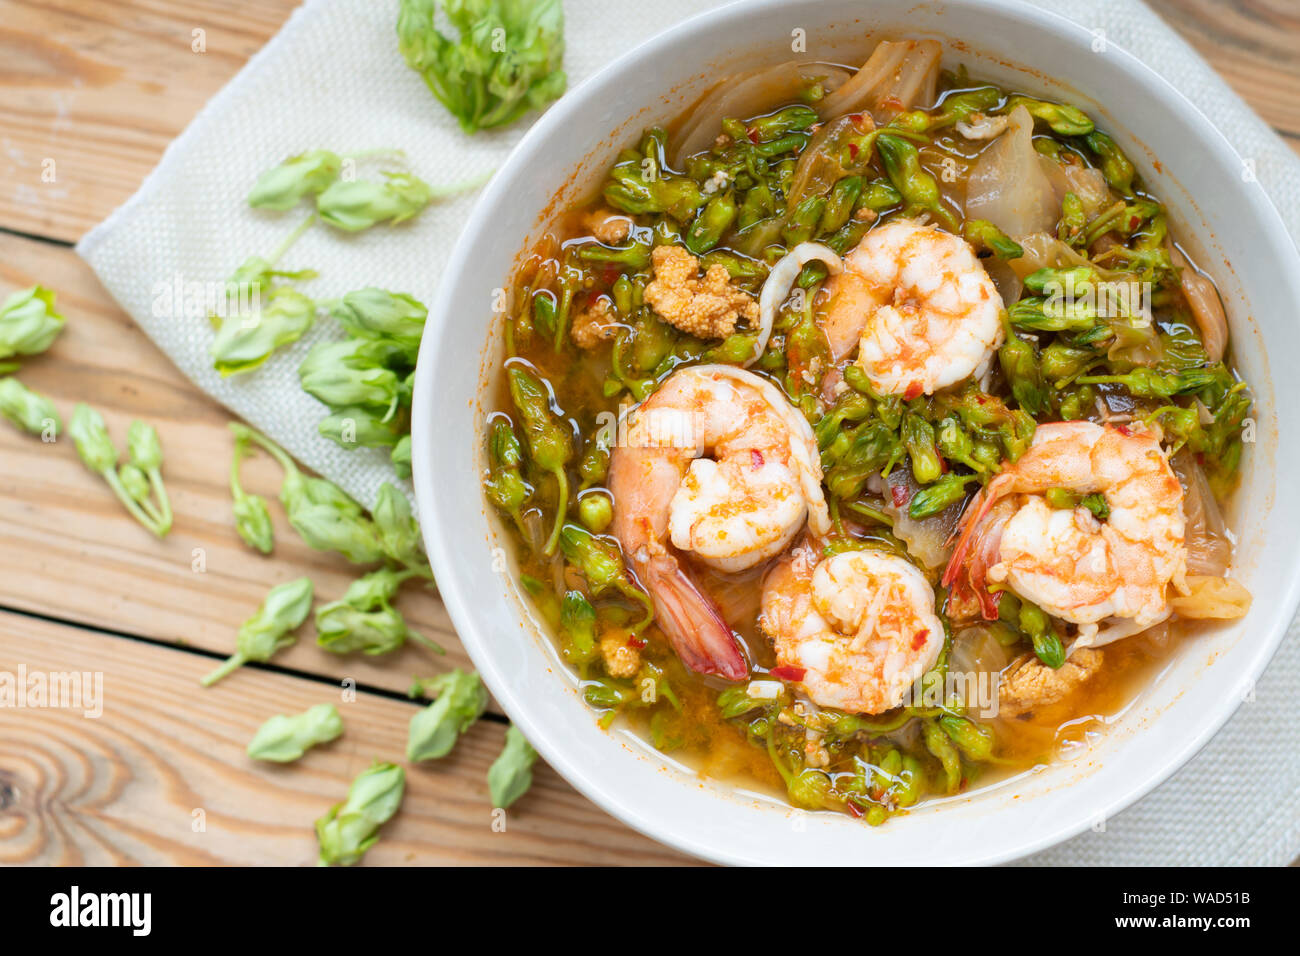 Sour soup with shrimp and cowslip creeper Stock Photo